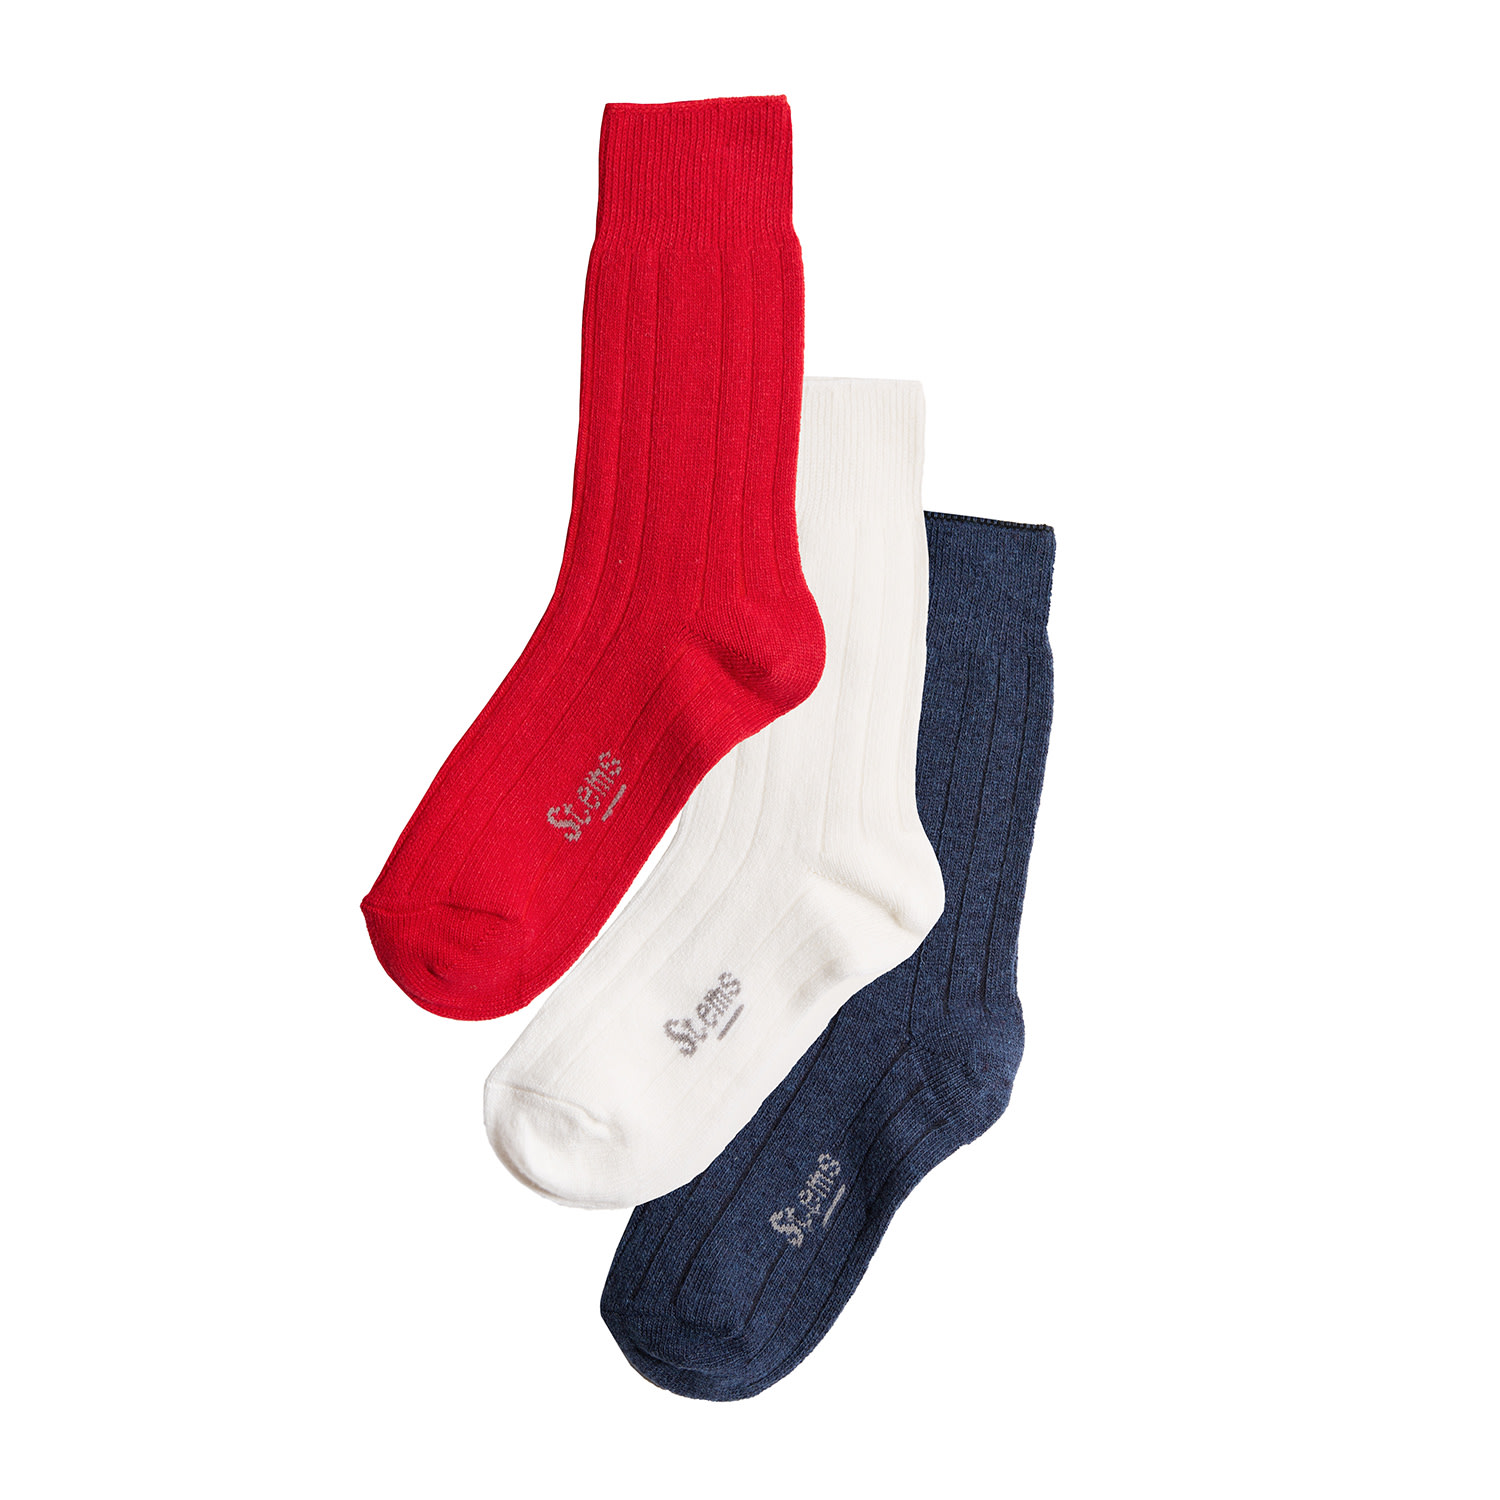 Women’s Lux Cashmere Wool Socks Box Of Three - Navy Ivory Red One Size Stems